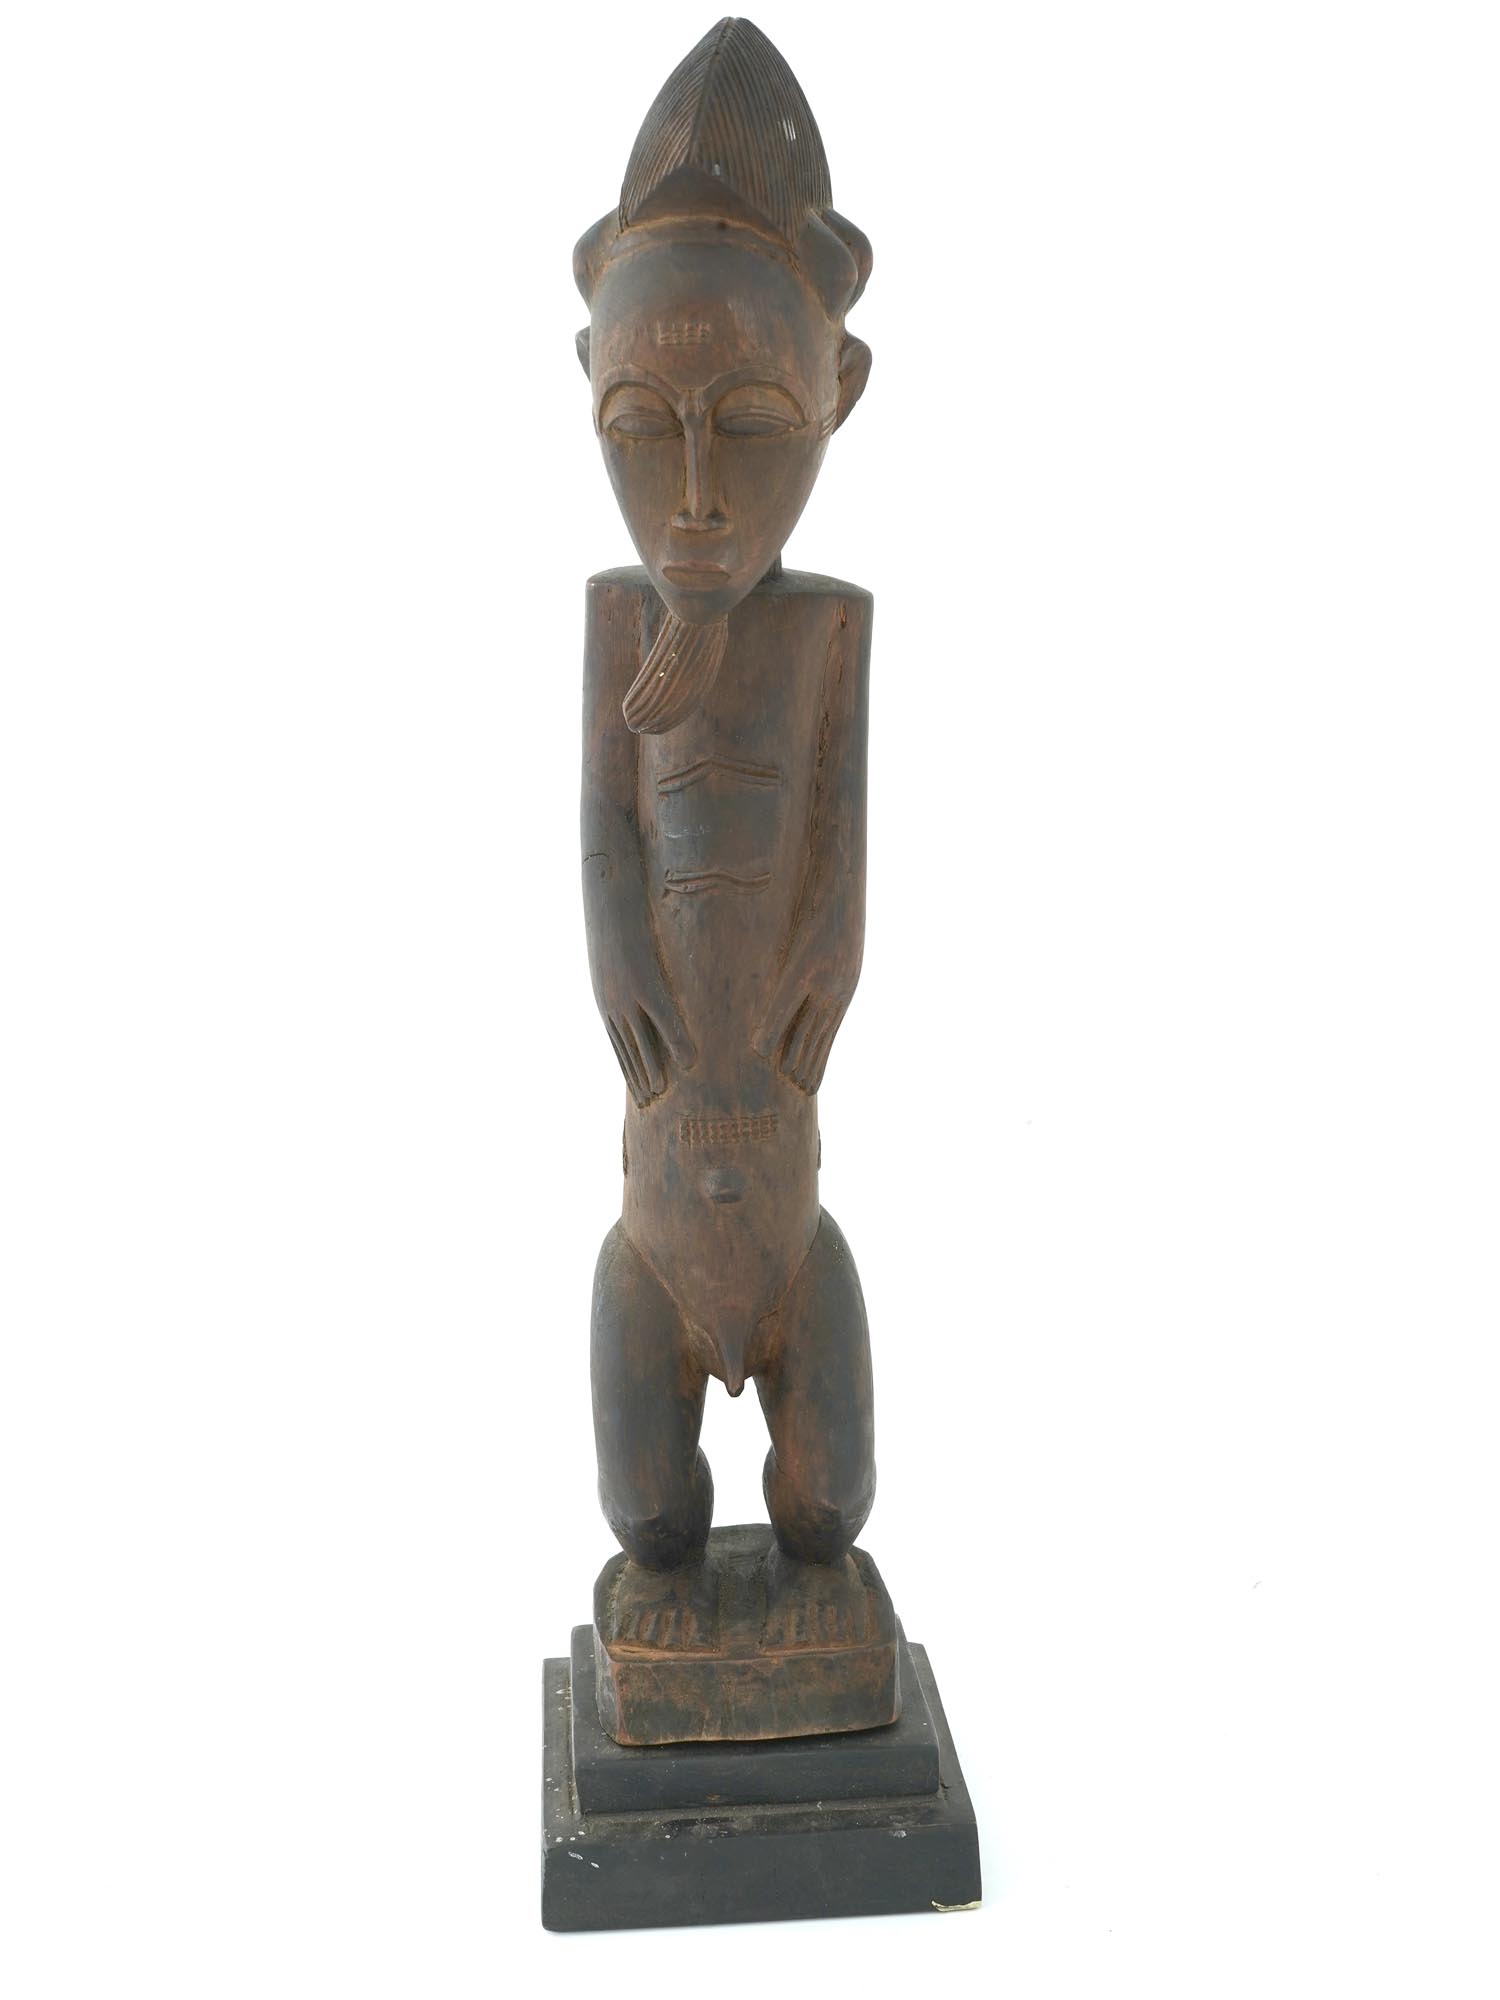 BAOLET WOODEN MALE FIGURINE IVORY COAST WEST AFRICA PIC-1